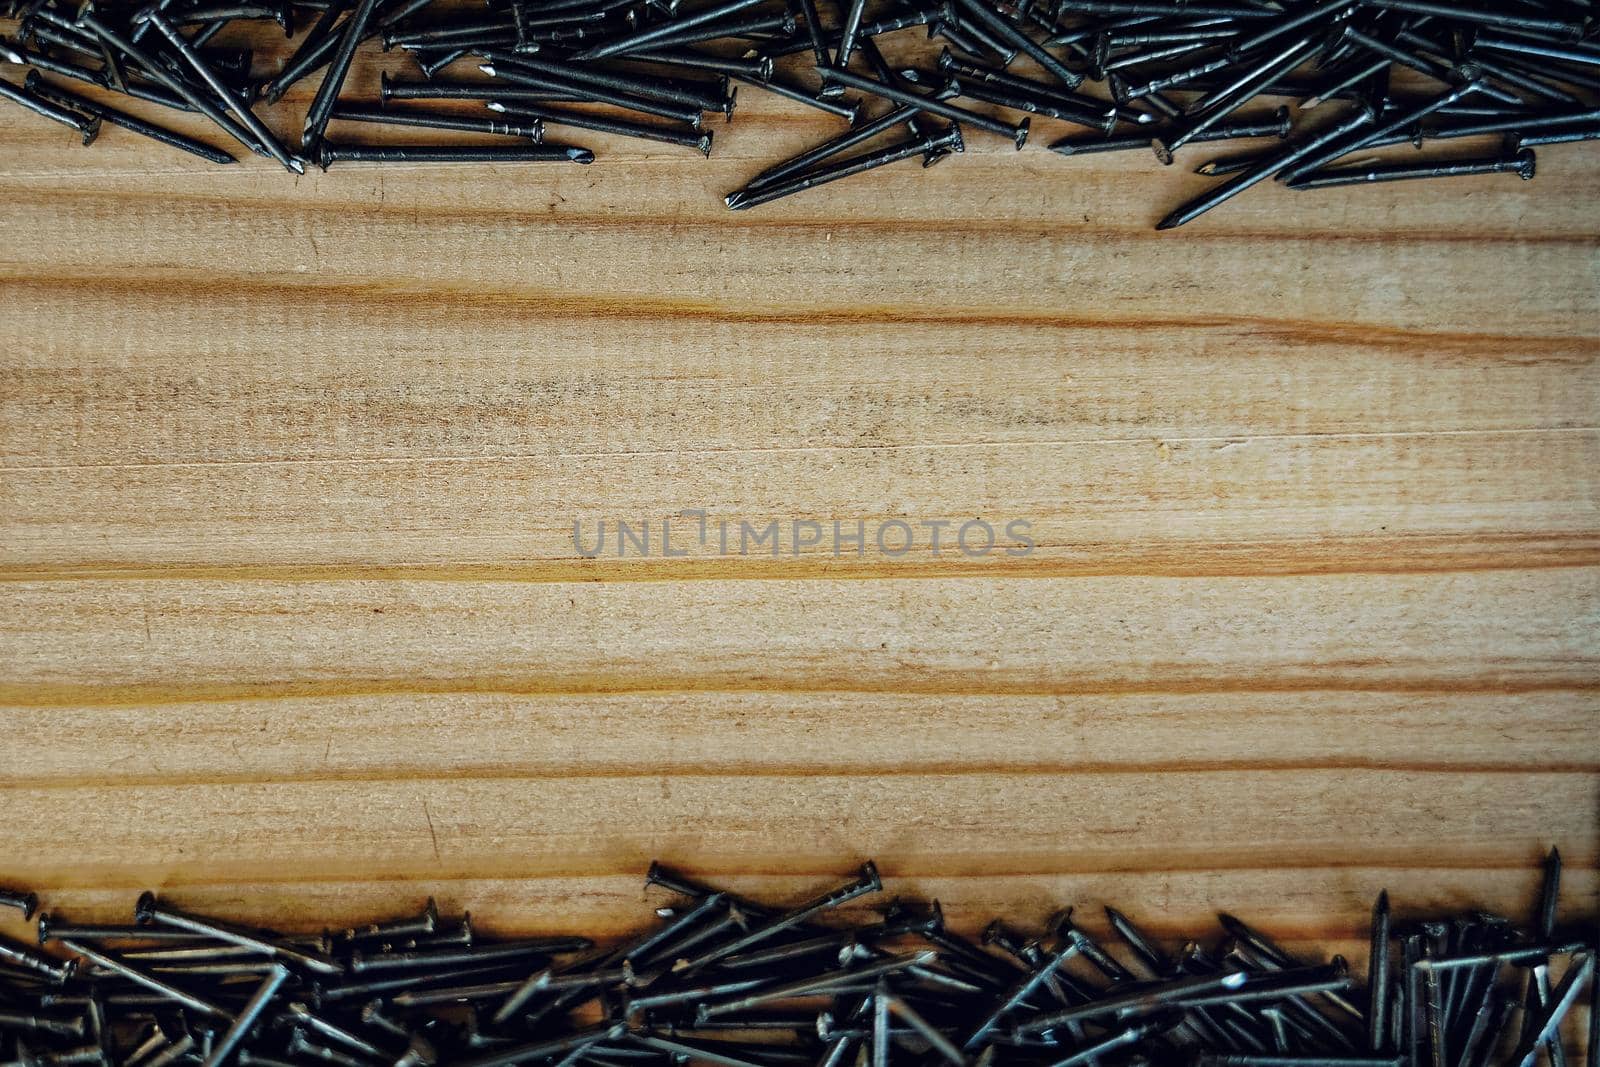 Small nails are scattered on the wooden Board. Background with space to copy. Advertising nails on wood